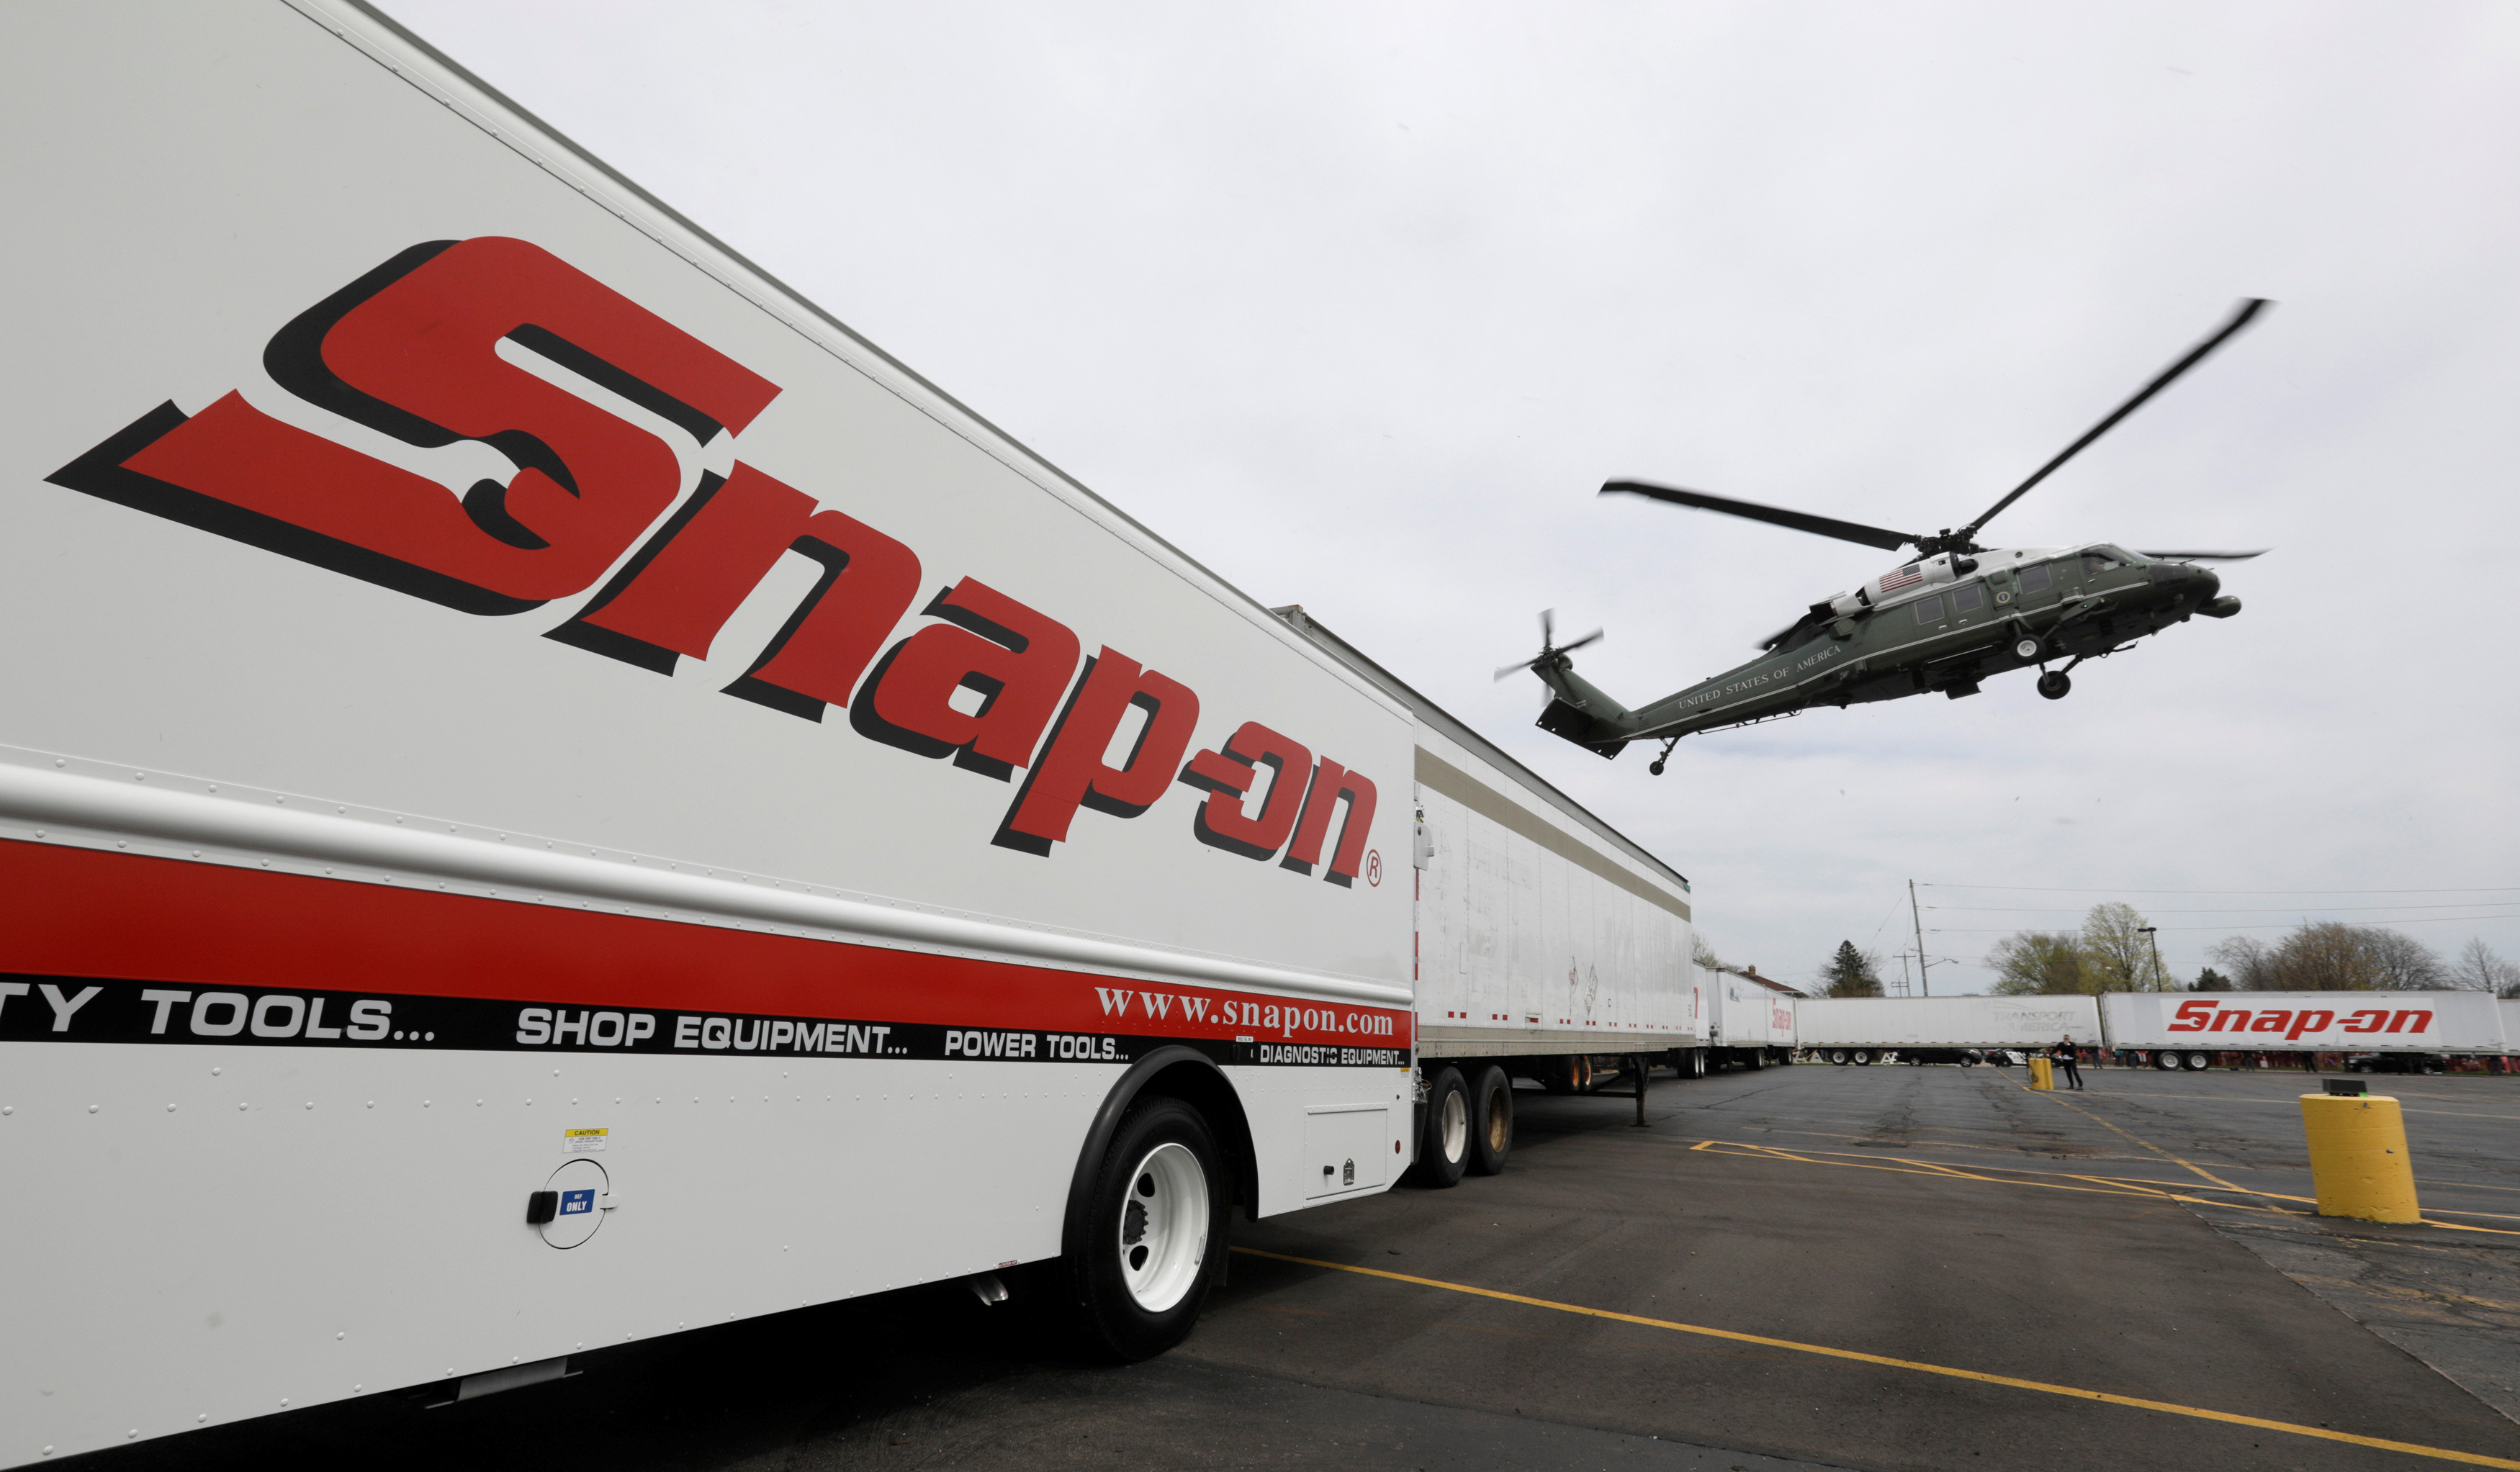 Marine One with U.S. President Donald Trump lands at the world headquarters of Snap-On Inc, a tool manufacturer in Kenosha